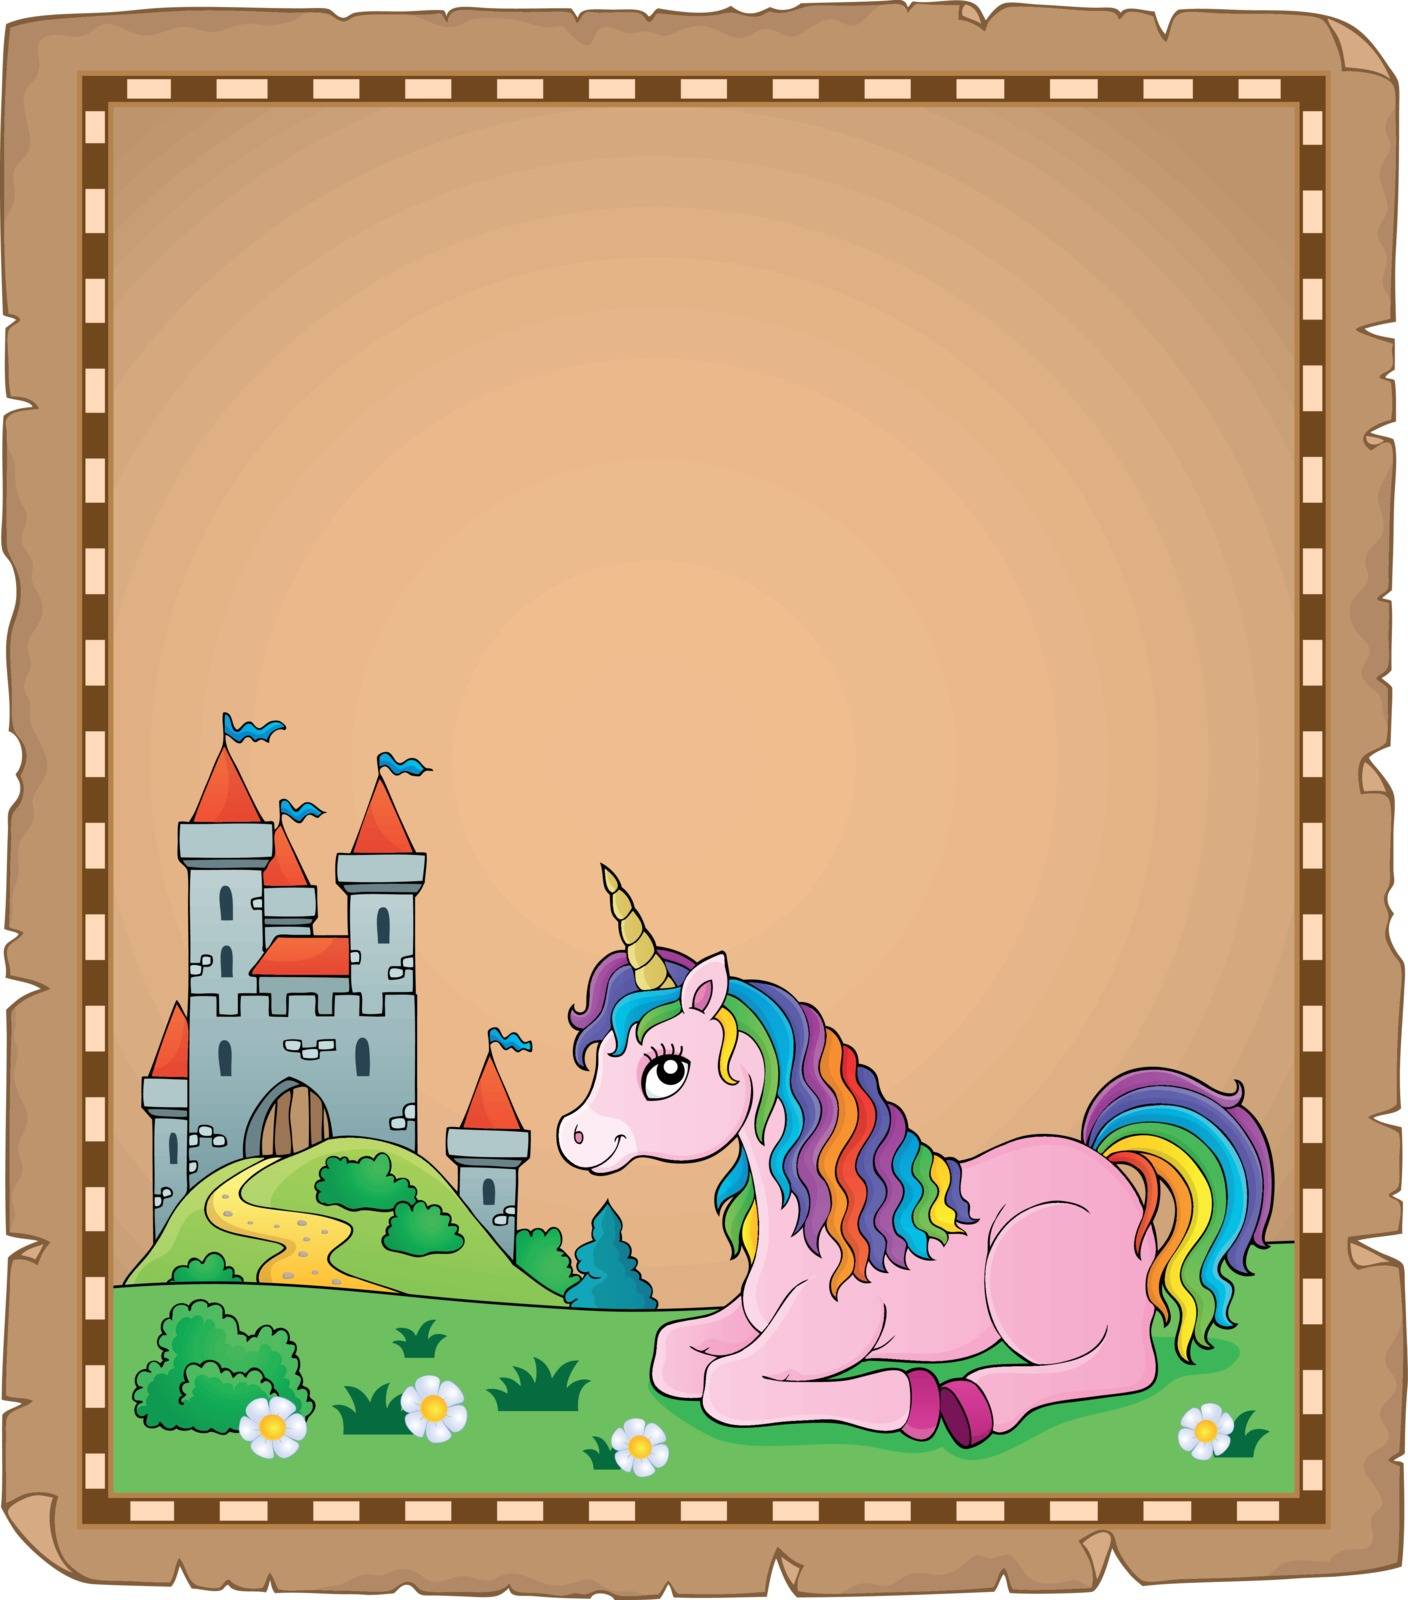 Parchment with lying unicorn theme 4 by clairev